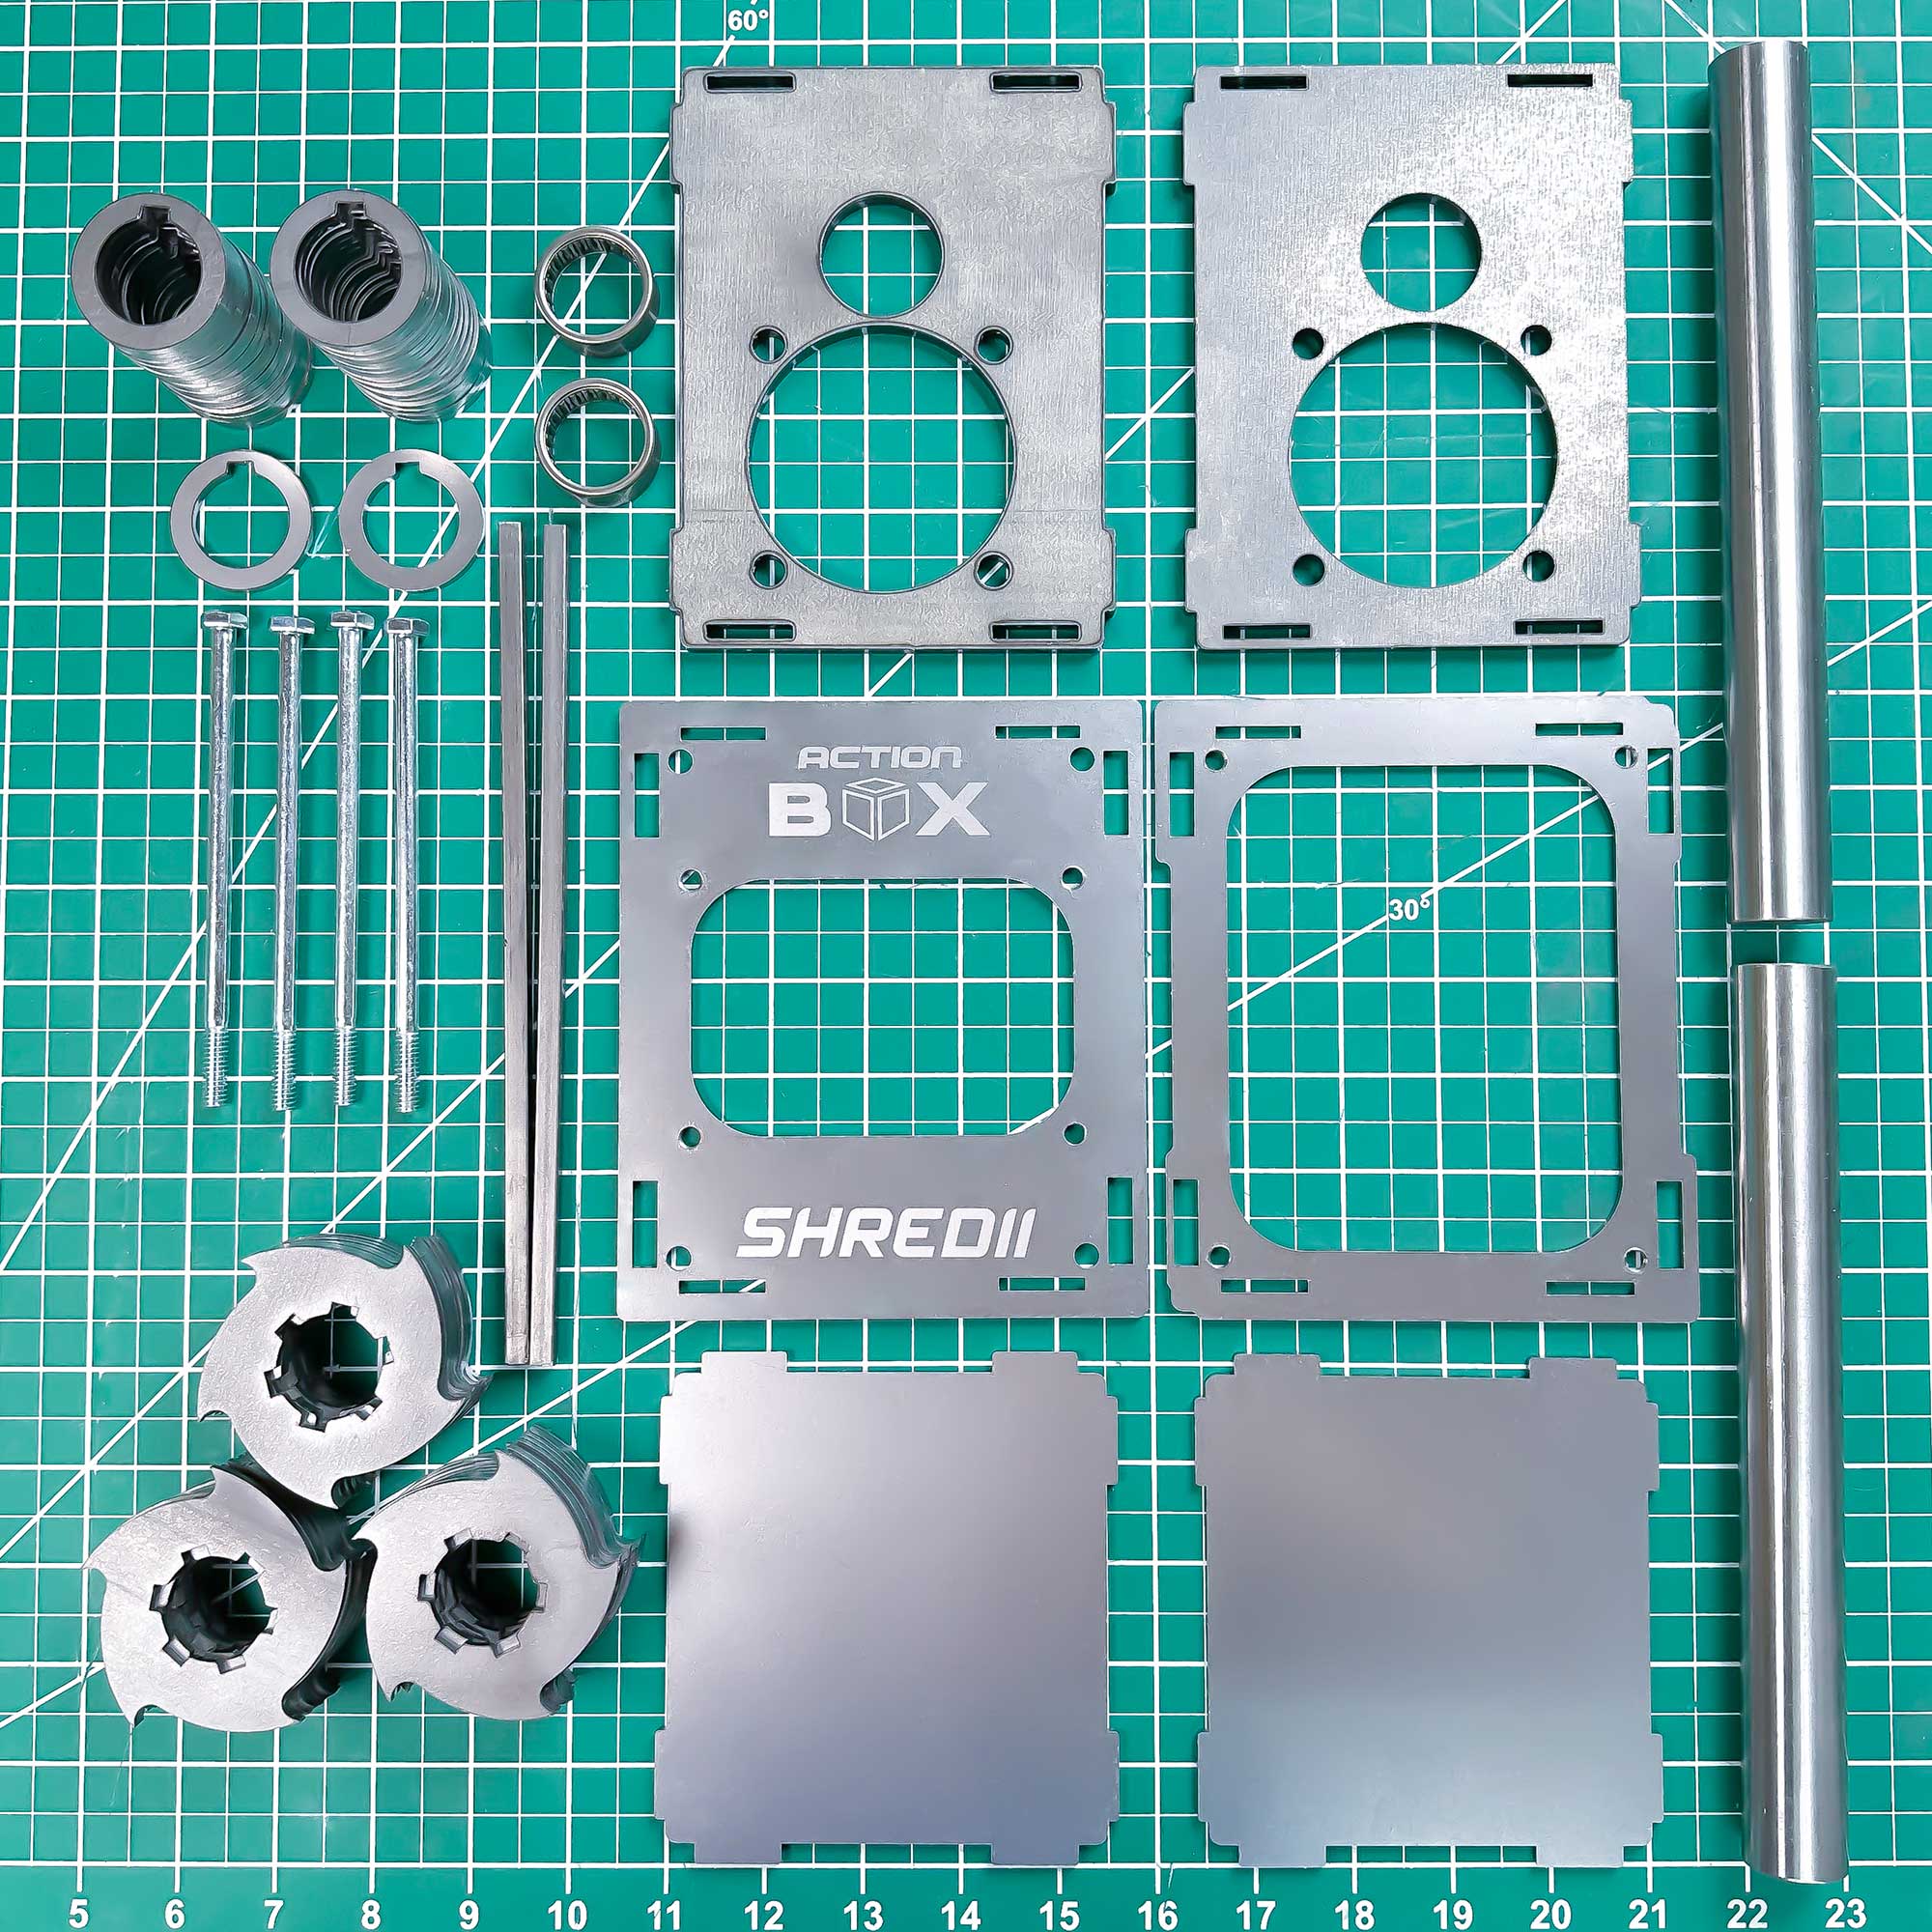 SHREDII 5.0 Mechanical Kit by Action BOX